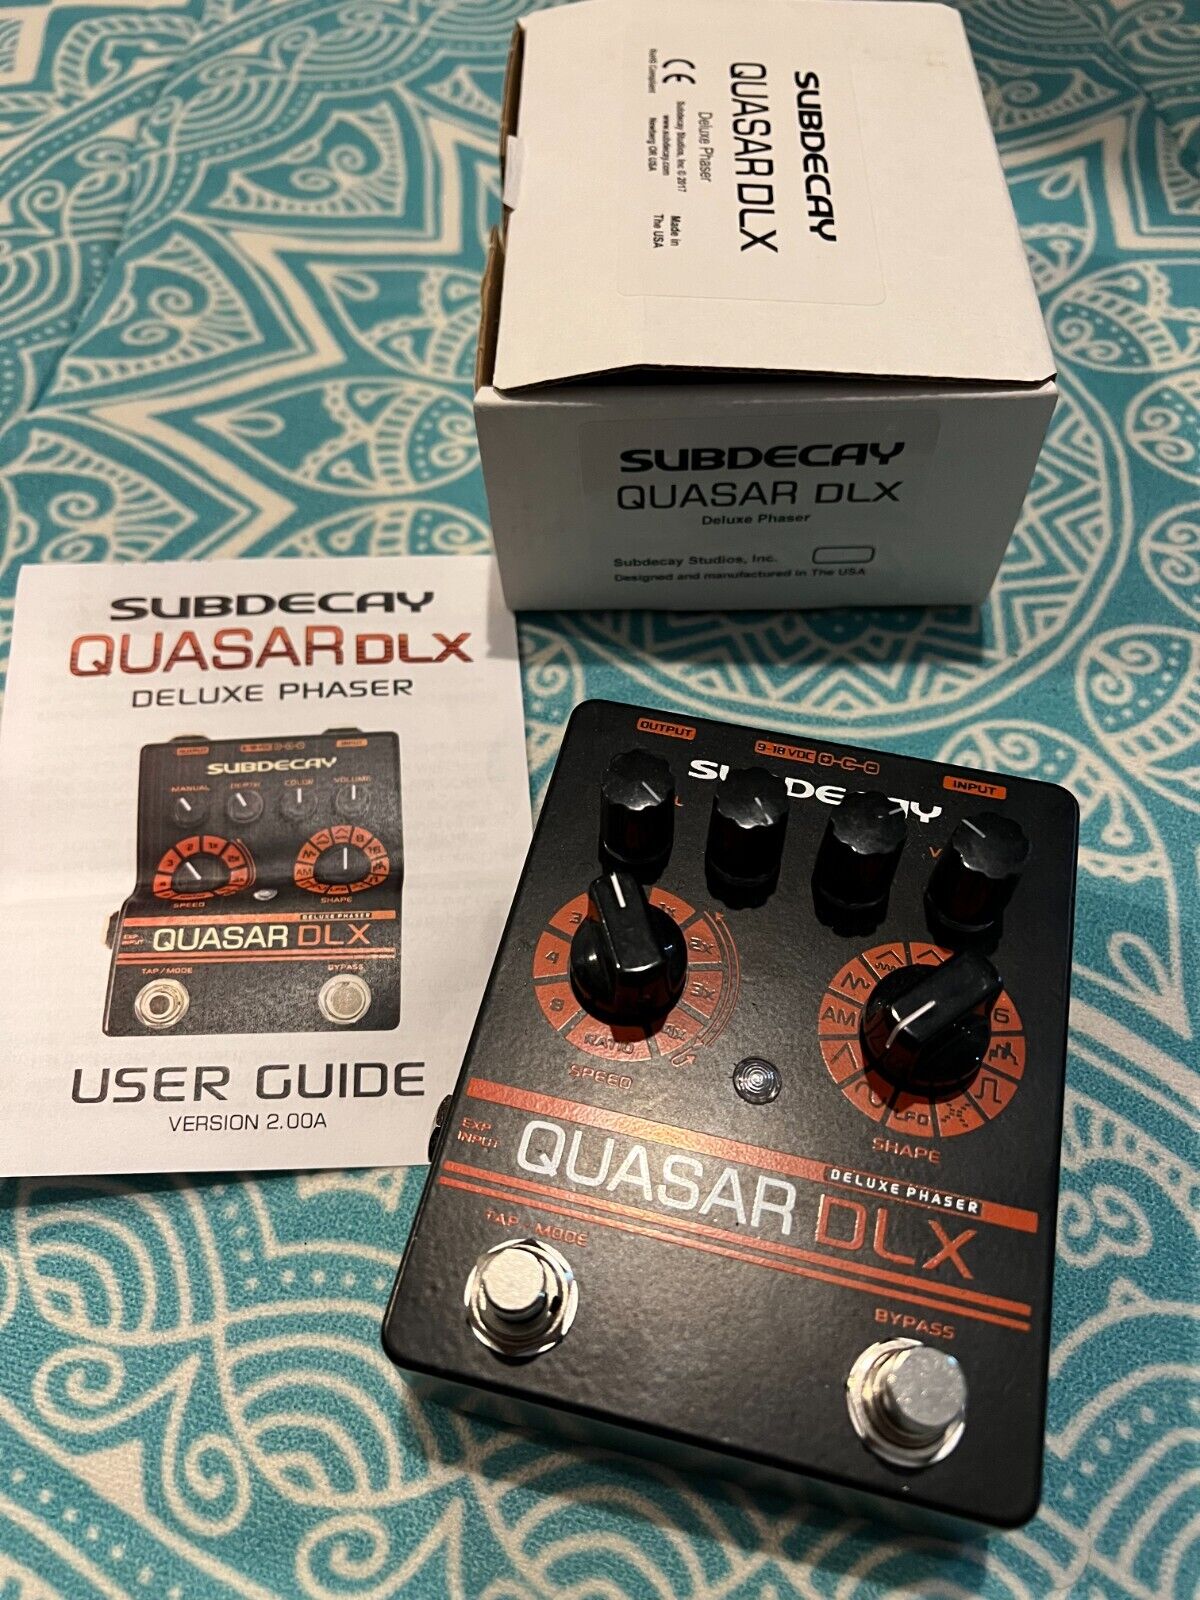 Subdecay Quasar Dlx Ii Deluxe Phaser Analog Phase Shifter Lfo Shapes, Tap & Expr